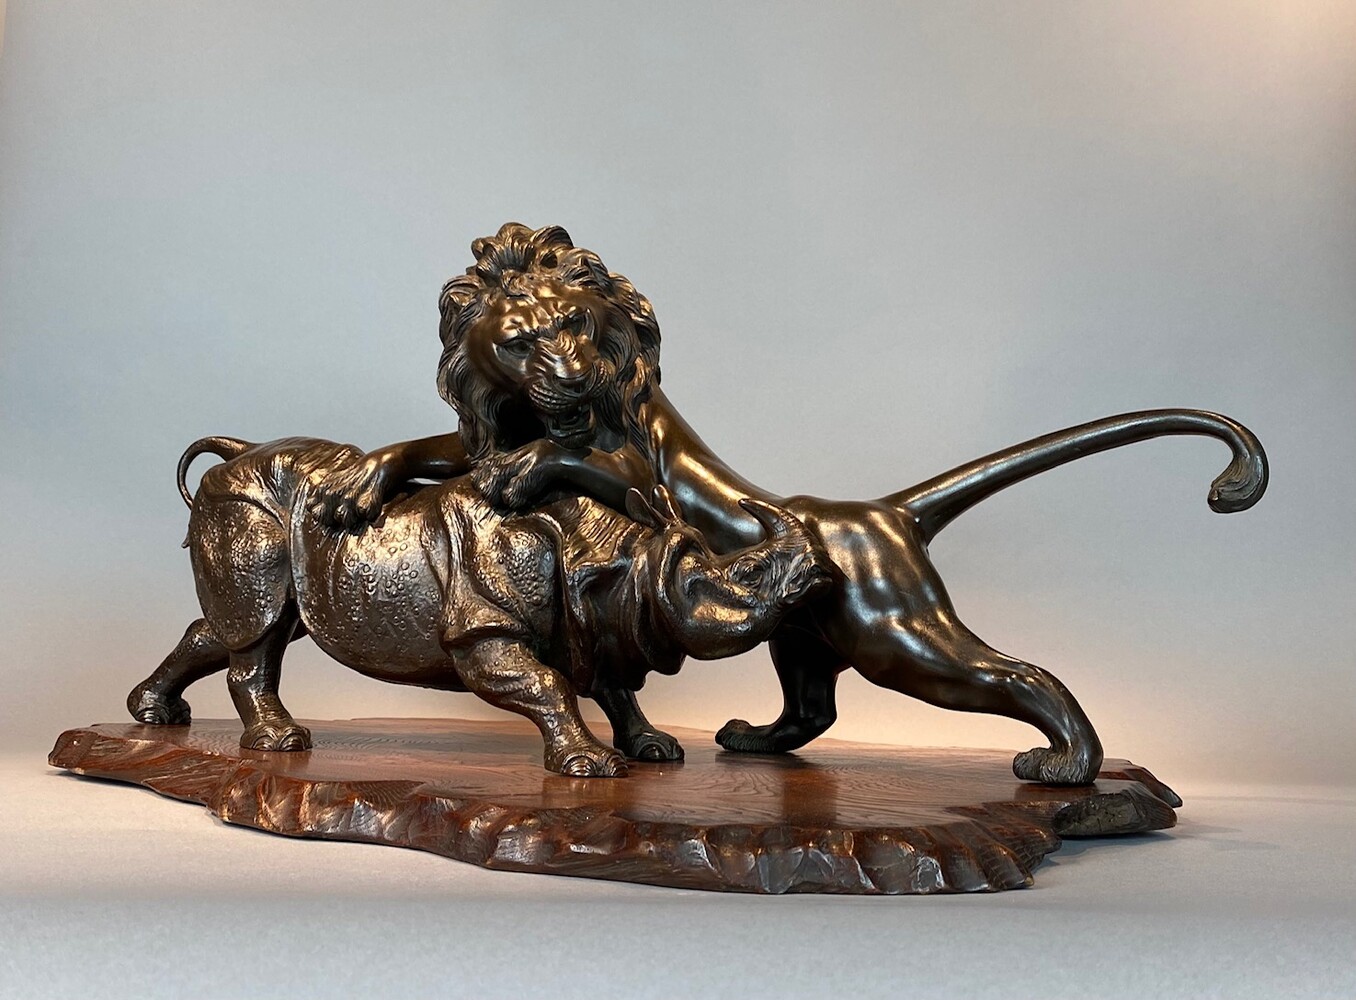 A rare Japanese bronze of a lion and an Asian rhino - Objects